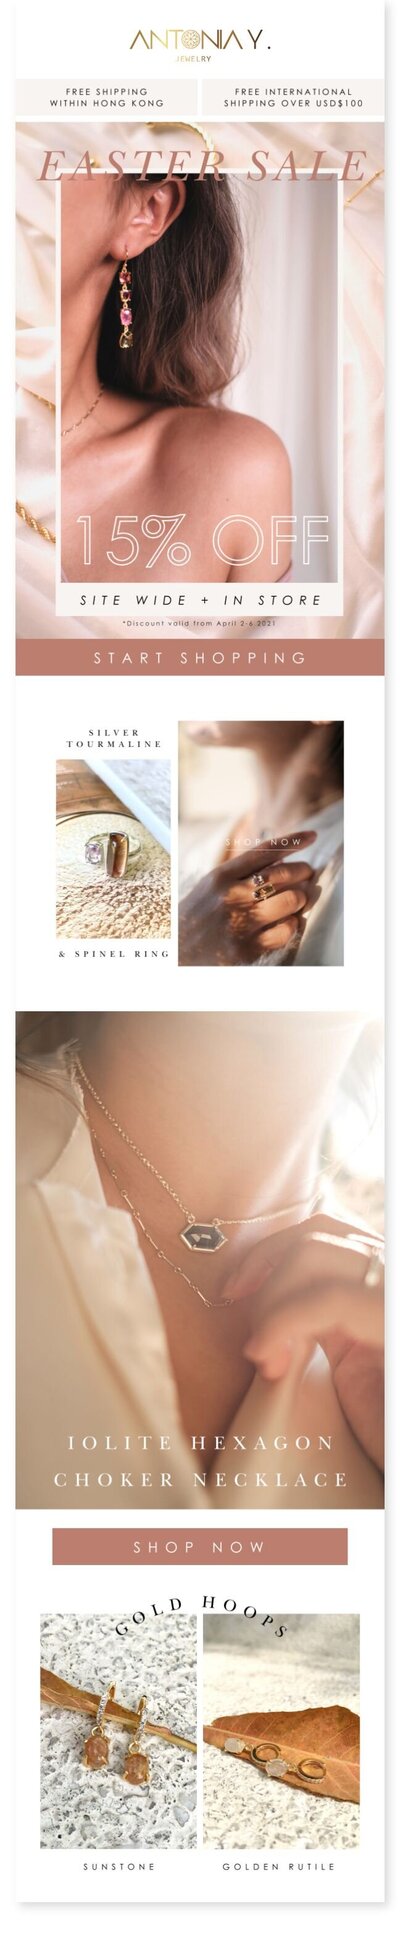 E-commerce email newsletter design by Graphic Designer in Hong Kong Kyra Janelle, promoting Antonia Y. Jewelry’s sitewide sale.